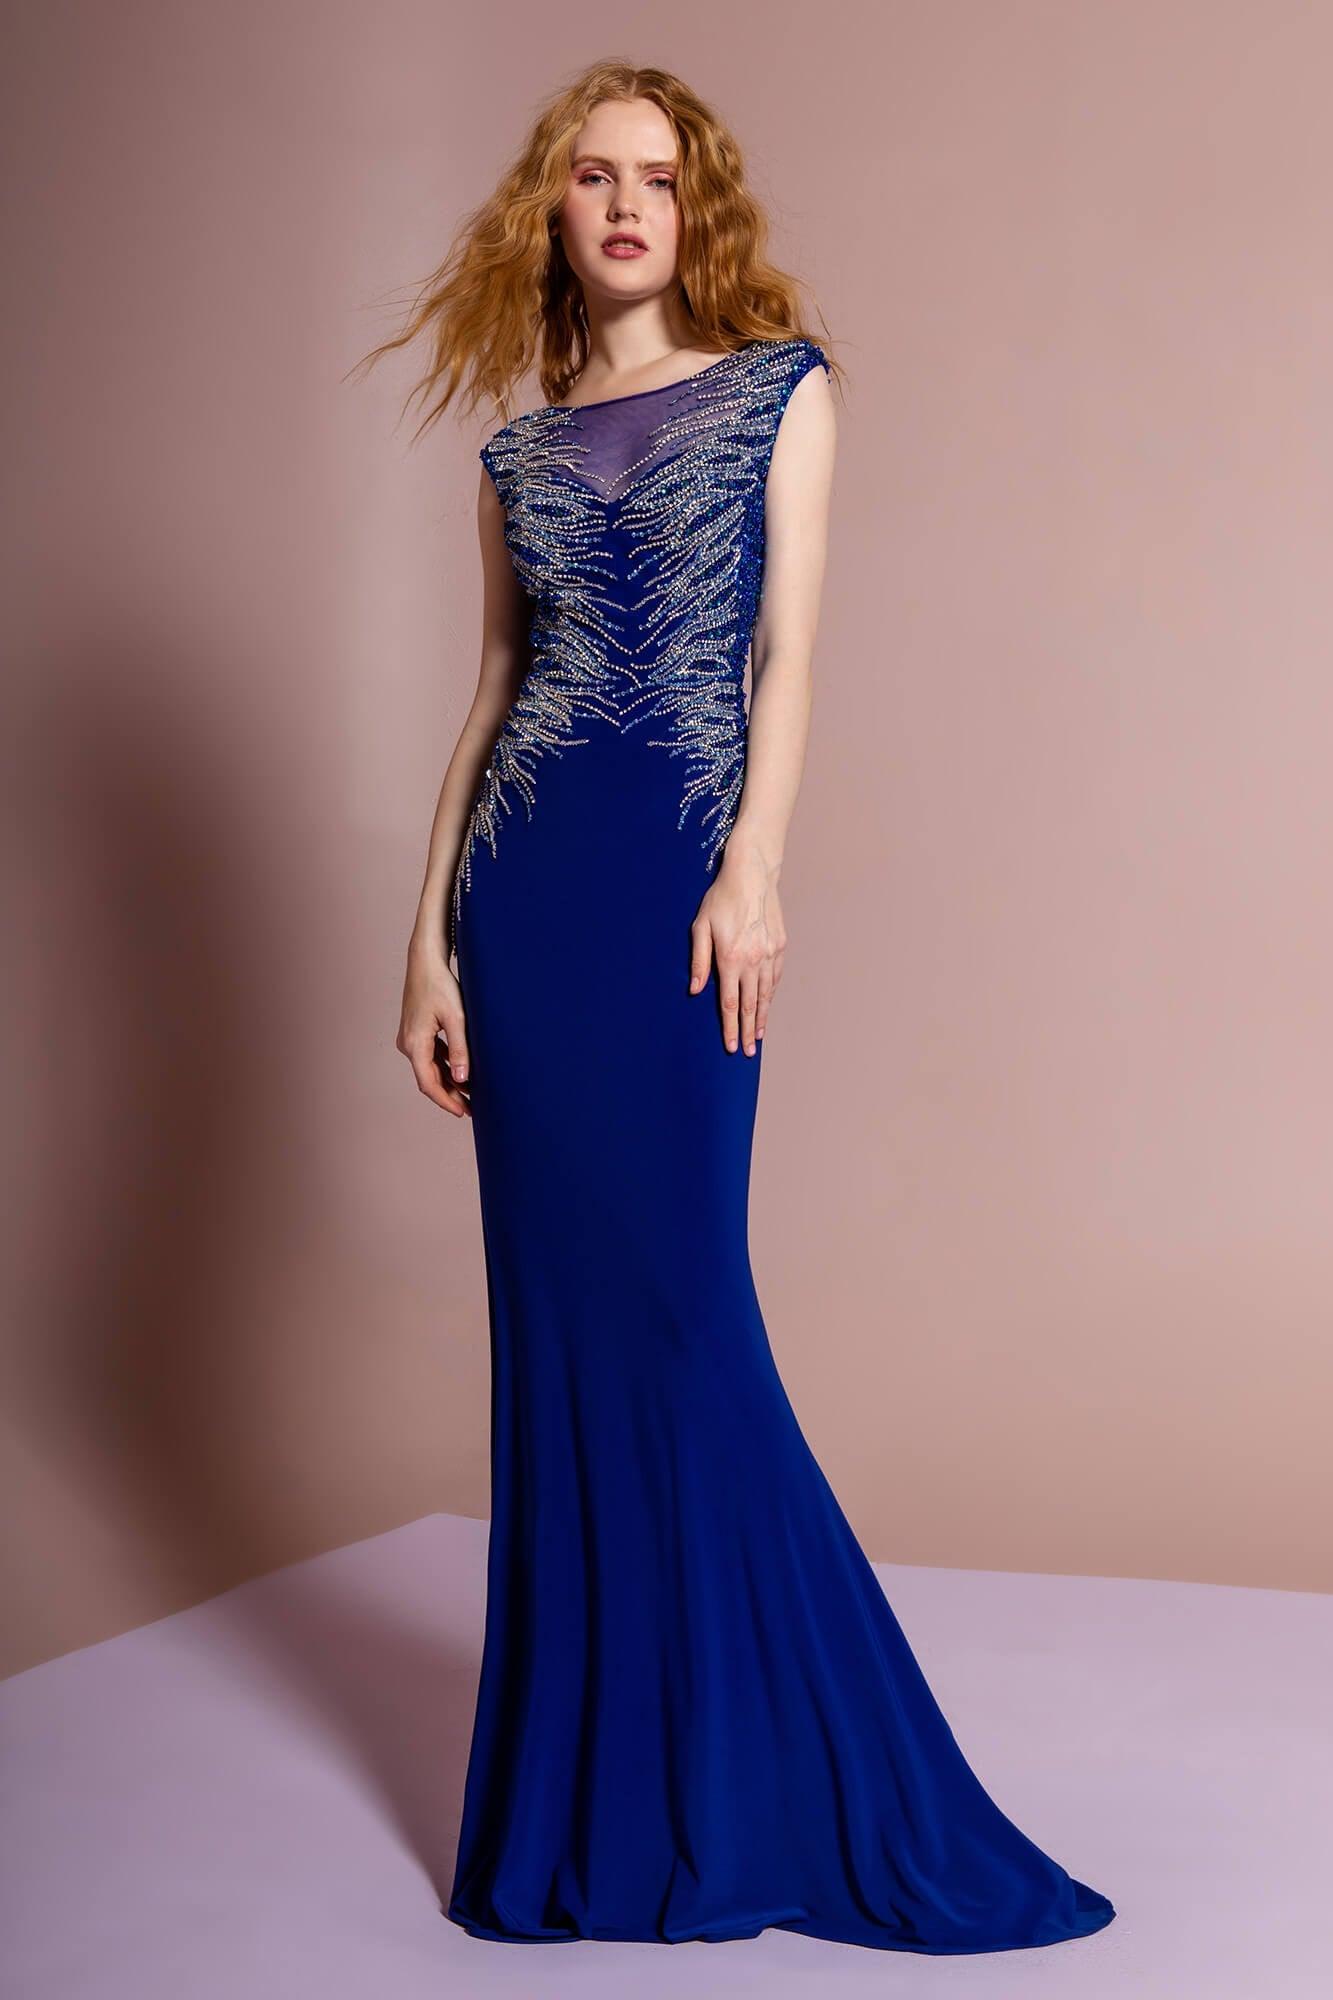 Prom Long Fitted Dress Evening Formal Gown - The Dress Outlet Elizabeth K